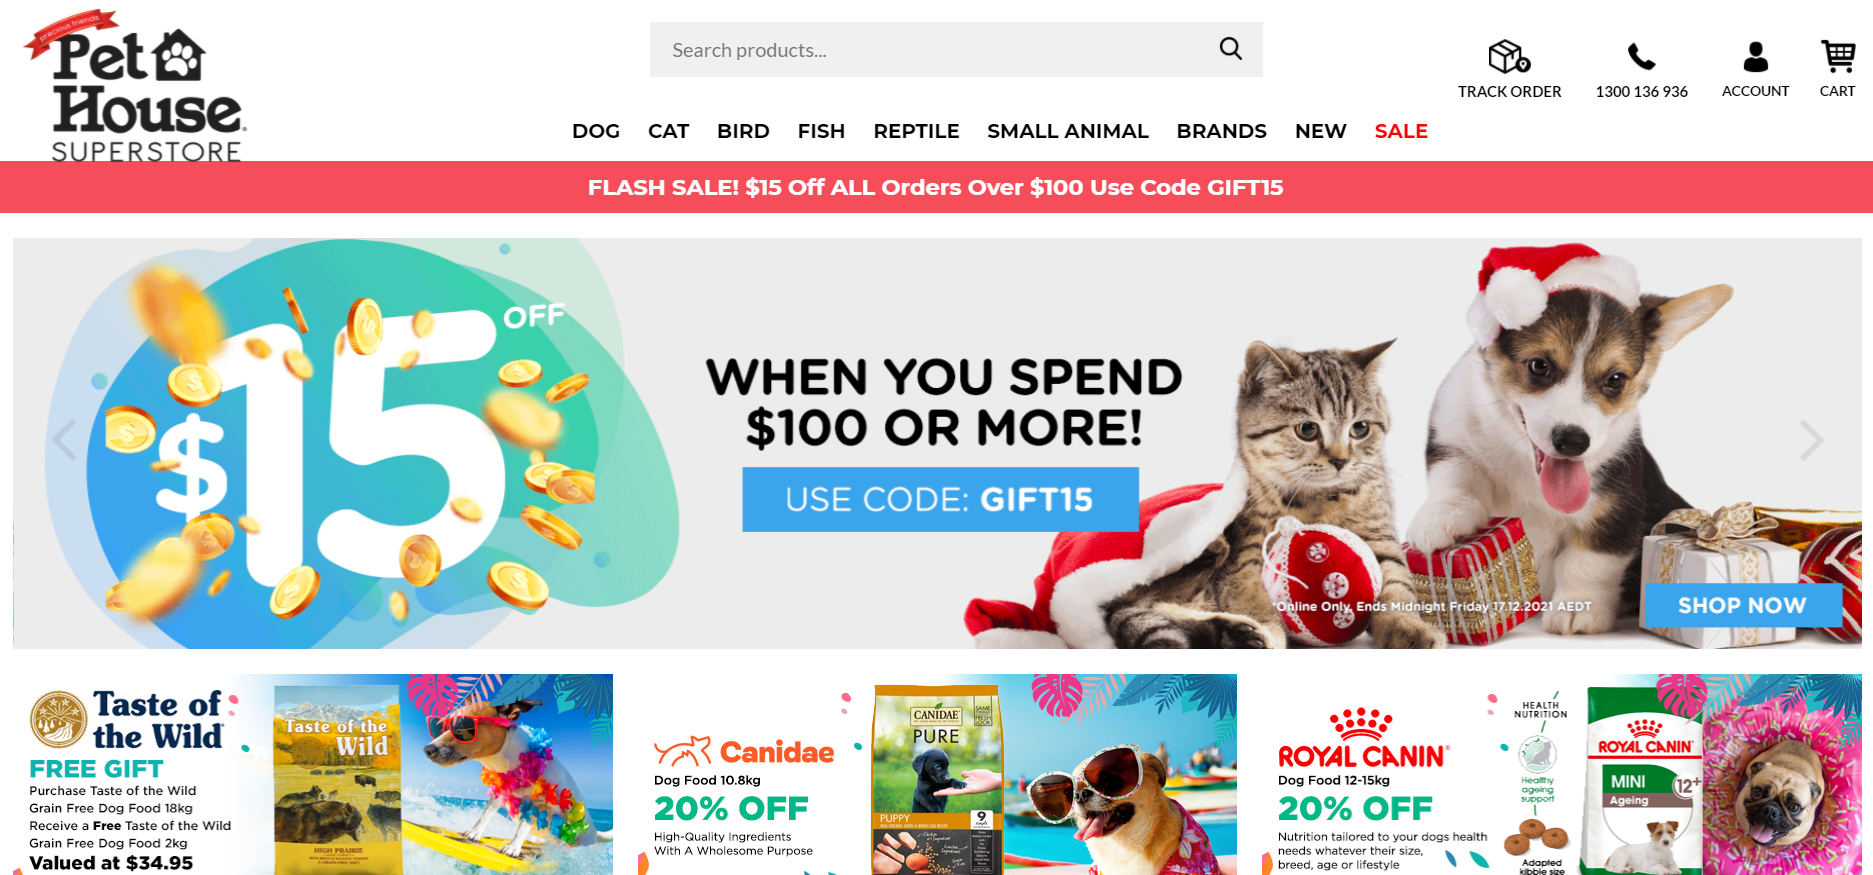 Flash sale extra $15 OFF $100 with Pet House promo code. Save on pet food, clothes & more